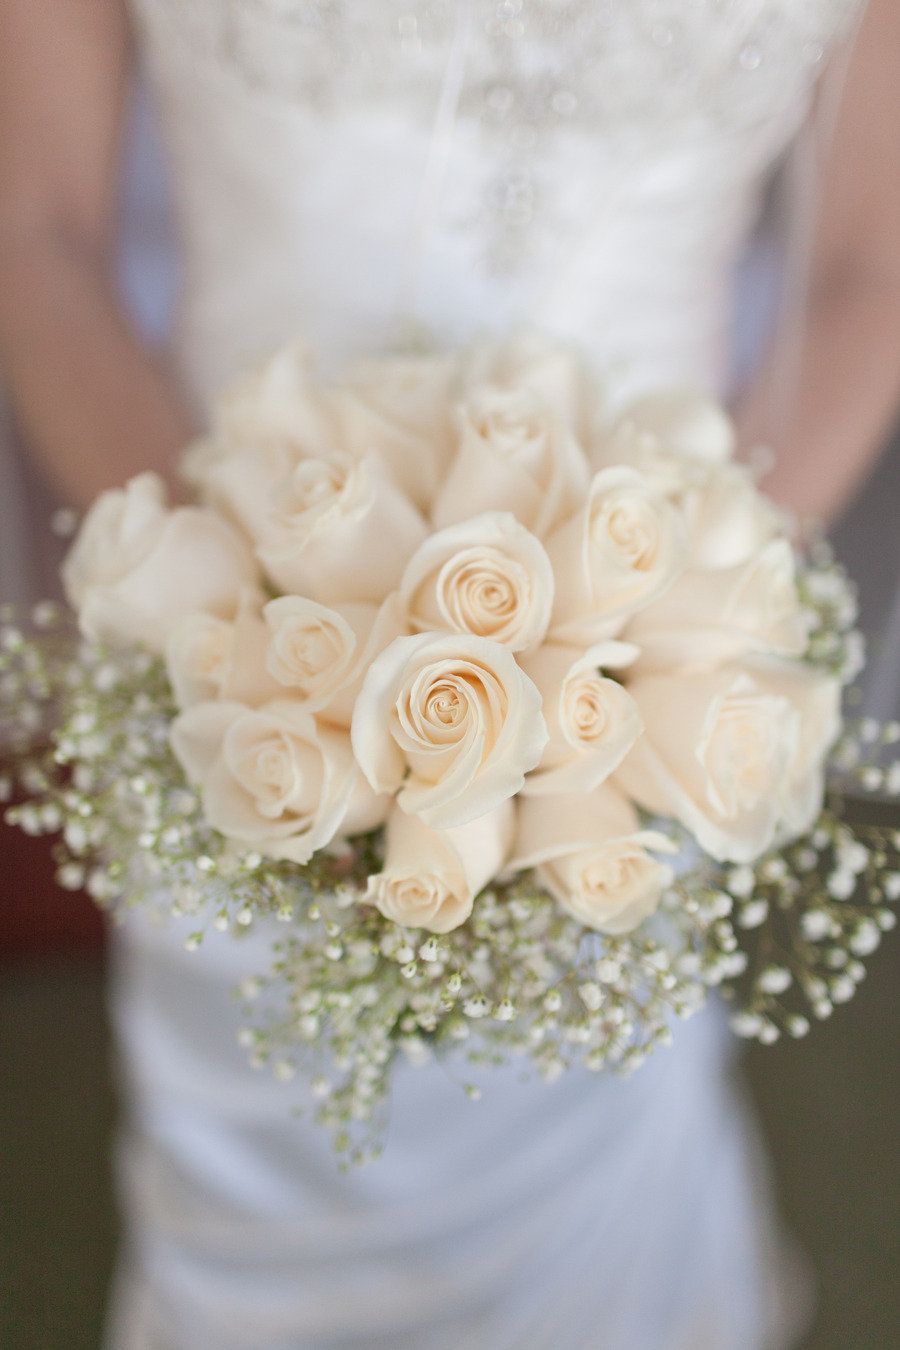 White roses and babys breath bouquet.  Photo:  Bob Care